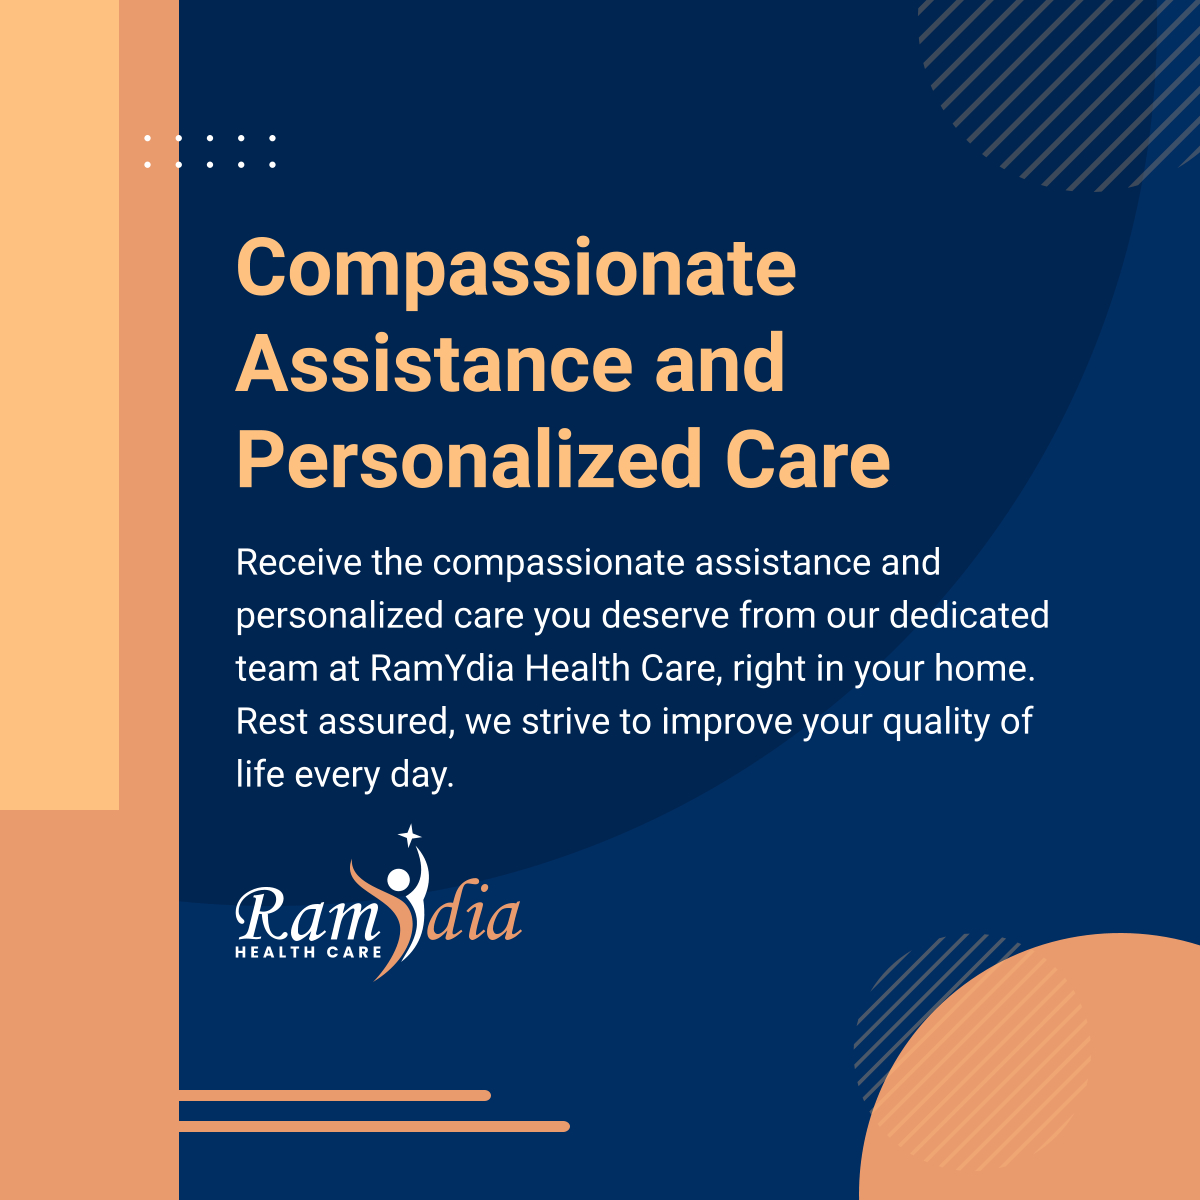 Compassionate Assistance and Personalized Care 

#PerthAmboyNJ #CompassionateAssistance #PersonalizedCare #HomeHealthCare